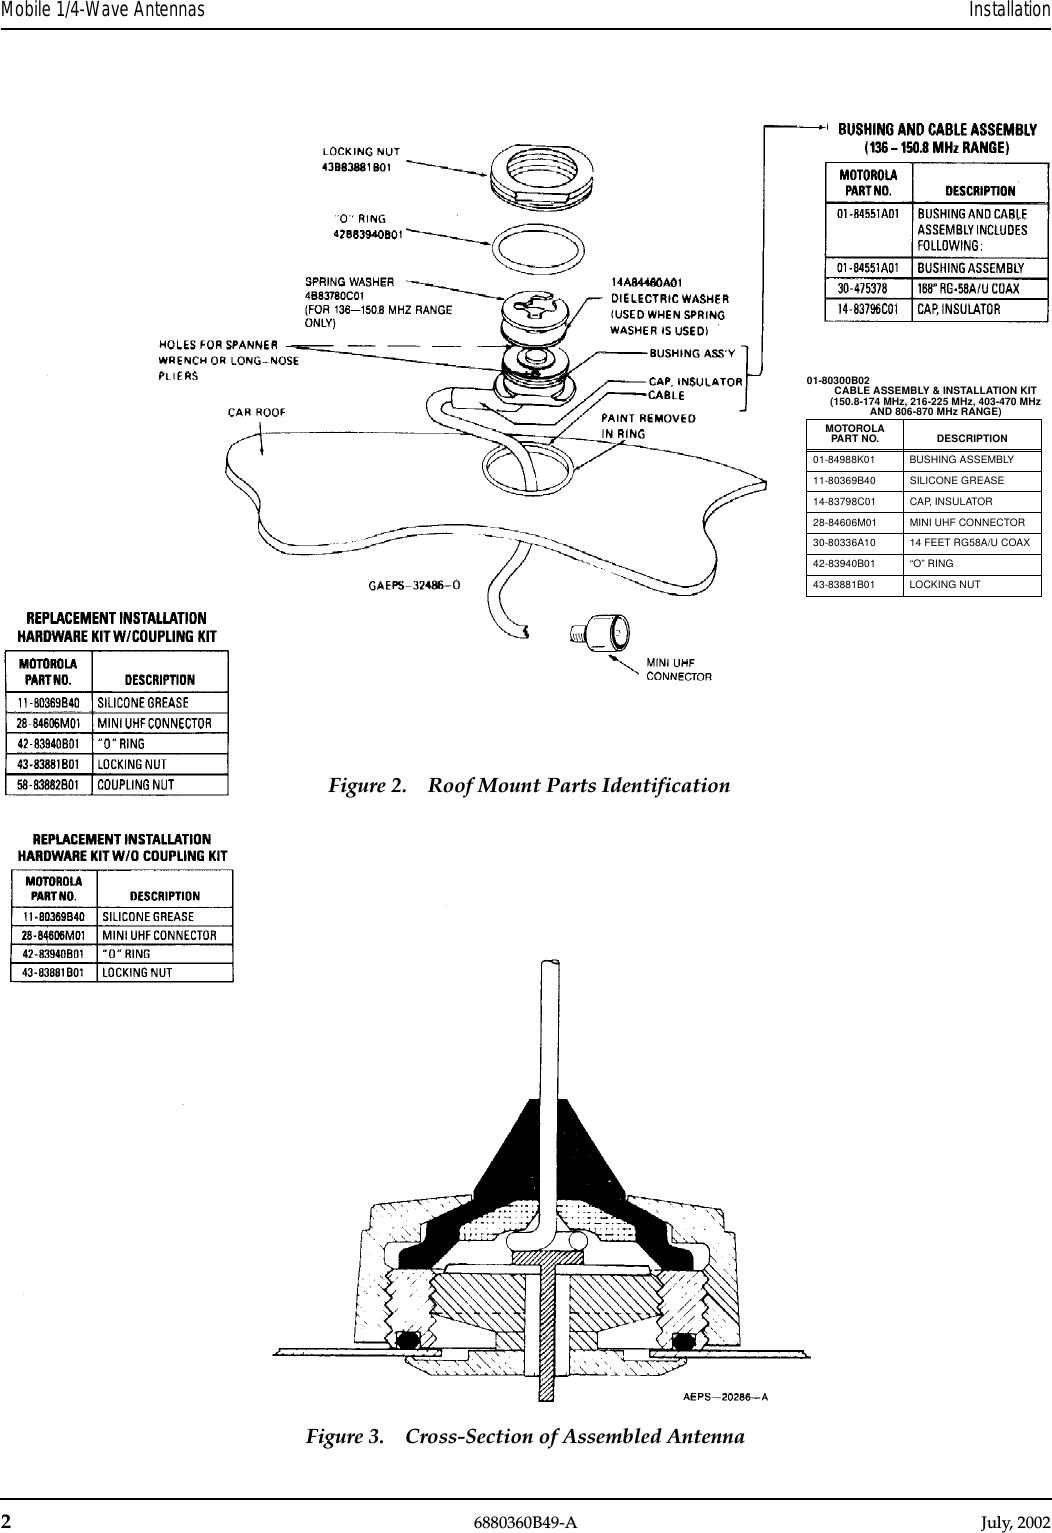 26880360B49-A July, 2002Mobile 1/4-Wave Antennas InstallationFigure 2. Roof Mount Parts Identification01-80300B02CABLE ASSEMBLY &amp; INSTALLATION KIT(150.8-174 MHz, 216-225 MHz, 403-470 MHzAND 806-870 MHz RANGE)MOTOROLA PART NO. DESCRIPTION01-84988K01 BUSHING ASSEMBLY11-80369B40 SILICONE GREASE14-83798C01 CAP, INSULATOR28-84606M01 MINI UHF CONNECTOR30-80336A10 14 FEET RG58A/U COAX42-83940B01 “O” RING43-83881B01 LOCKING NUTFigure 3. Cross-Section of Assembled Antenna